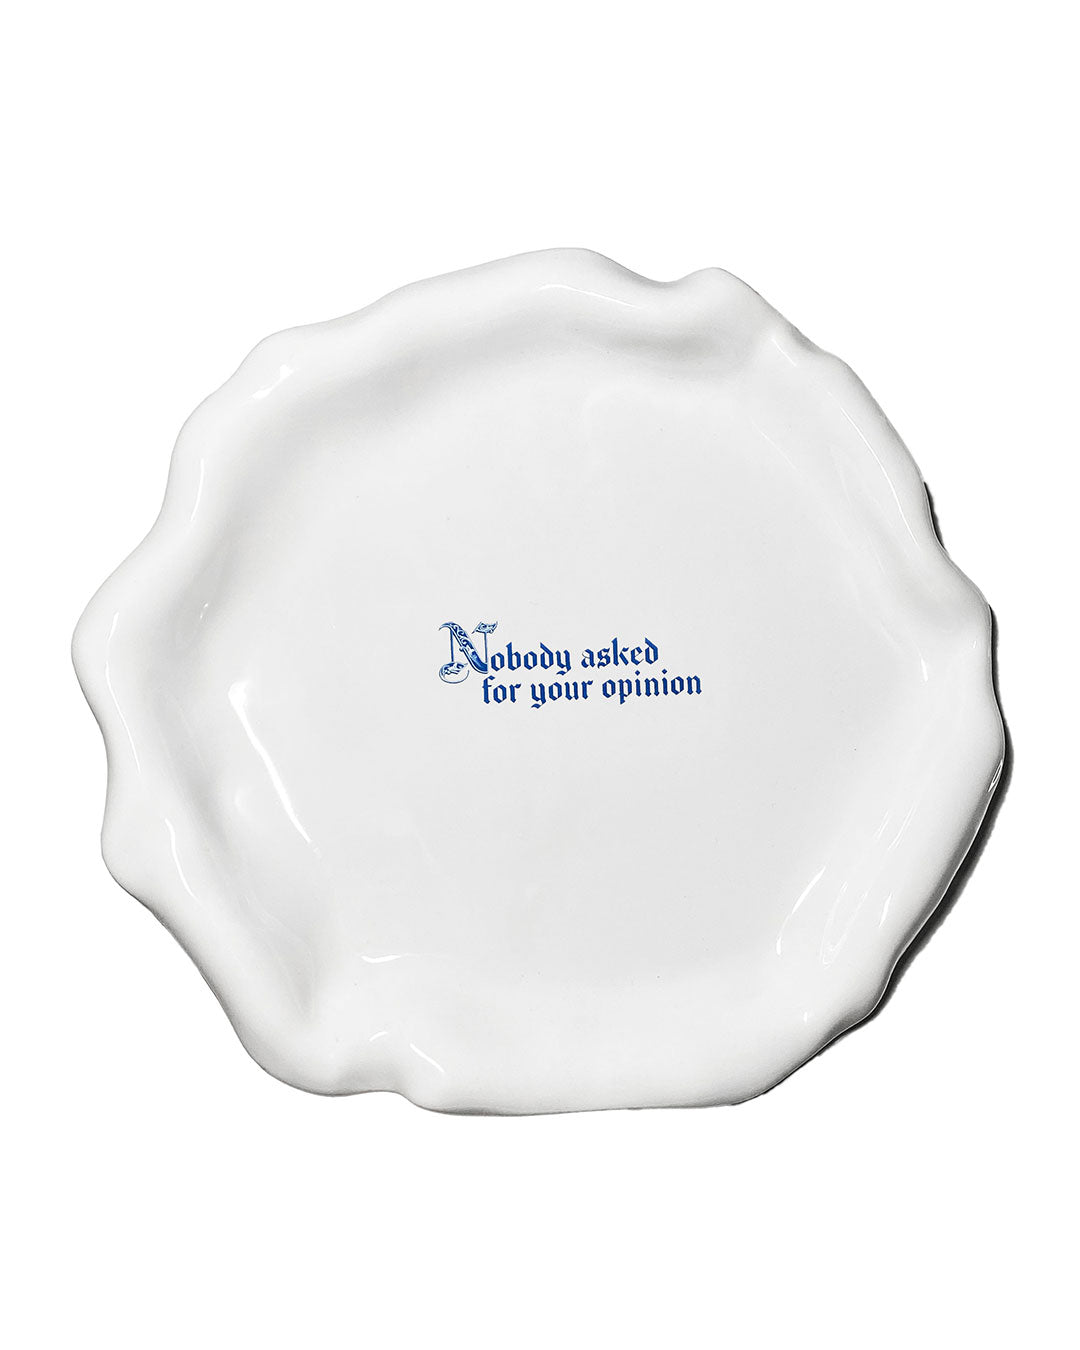 "Nobody asked for you opinion" Explicit Dinner Plate